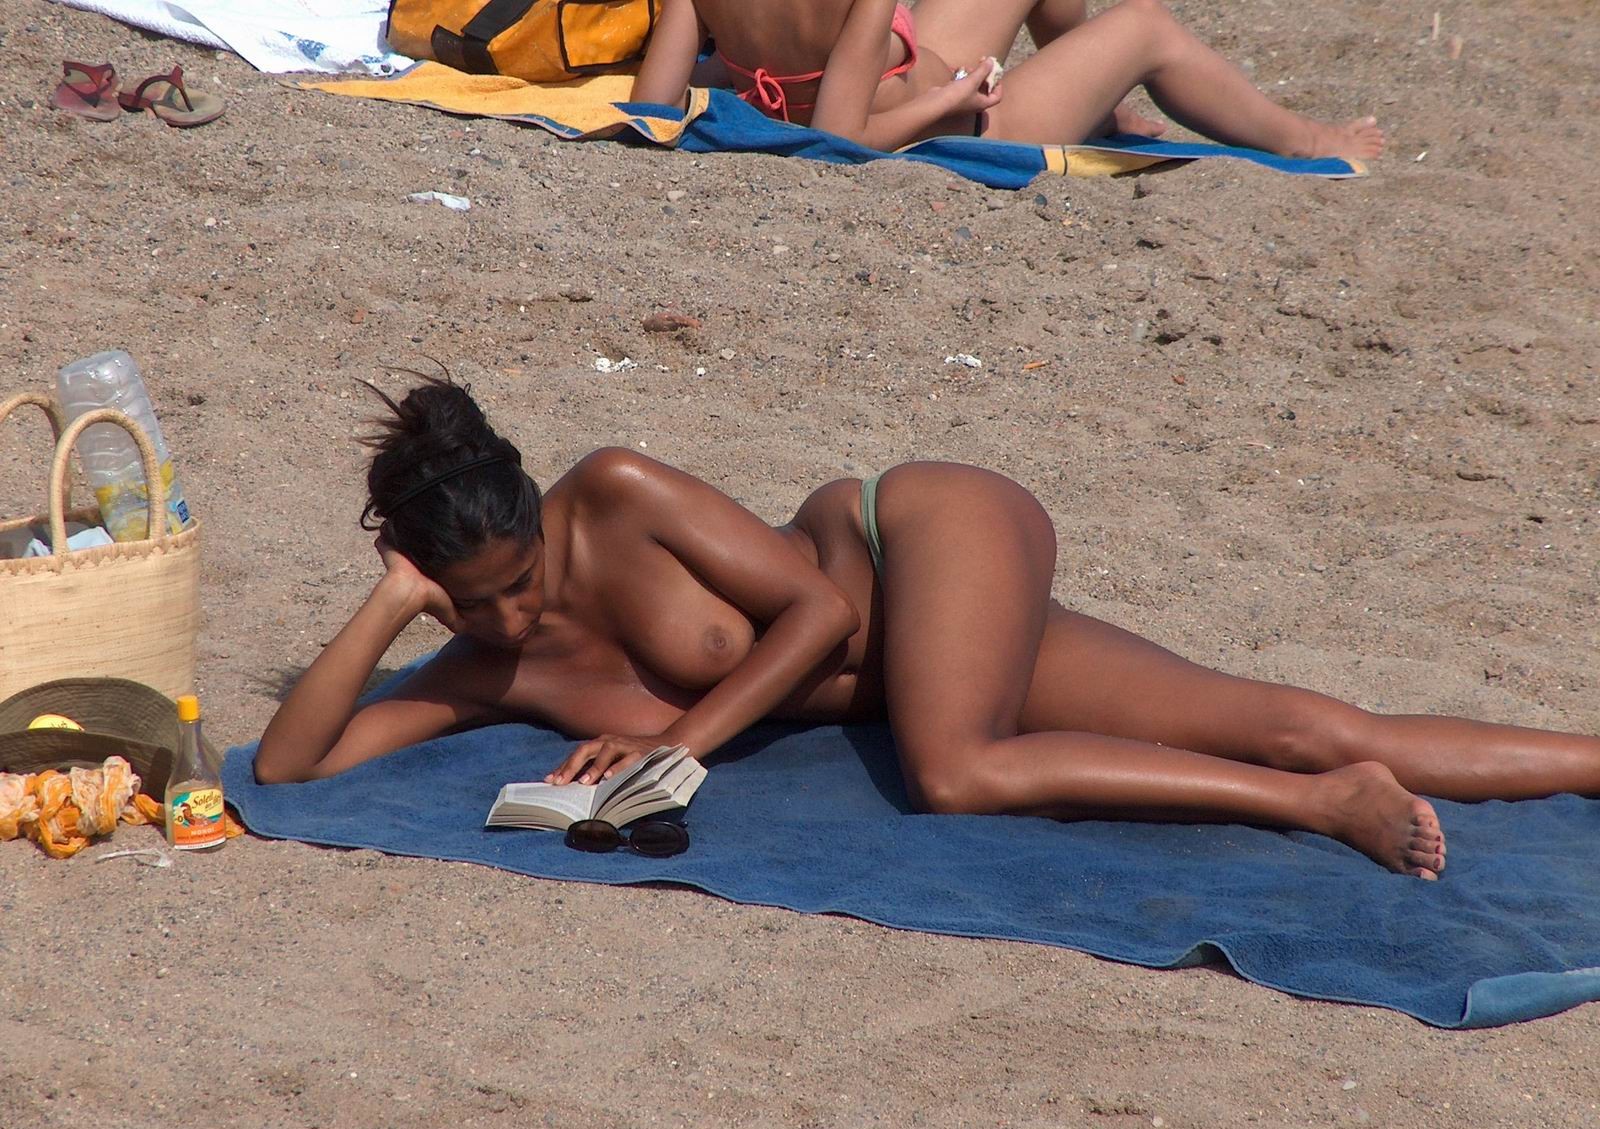 Pics of girls in the nude in Lisbon